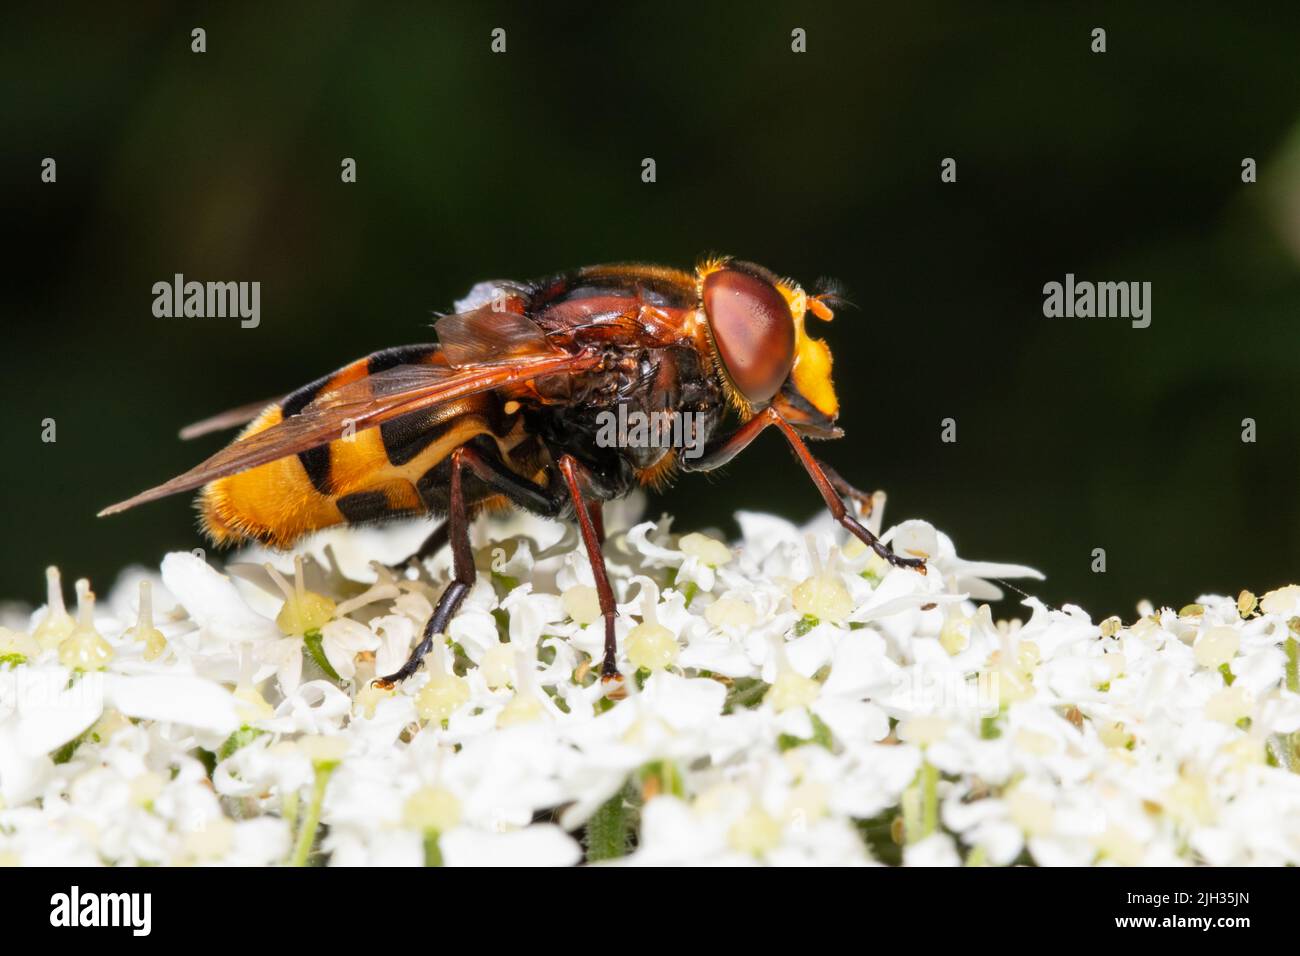 Volucella zonaria, the hornet mimic hoverfly, feeding on nectar from a white flower. Stock Photo